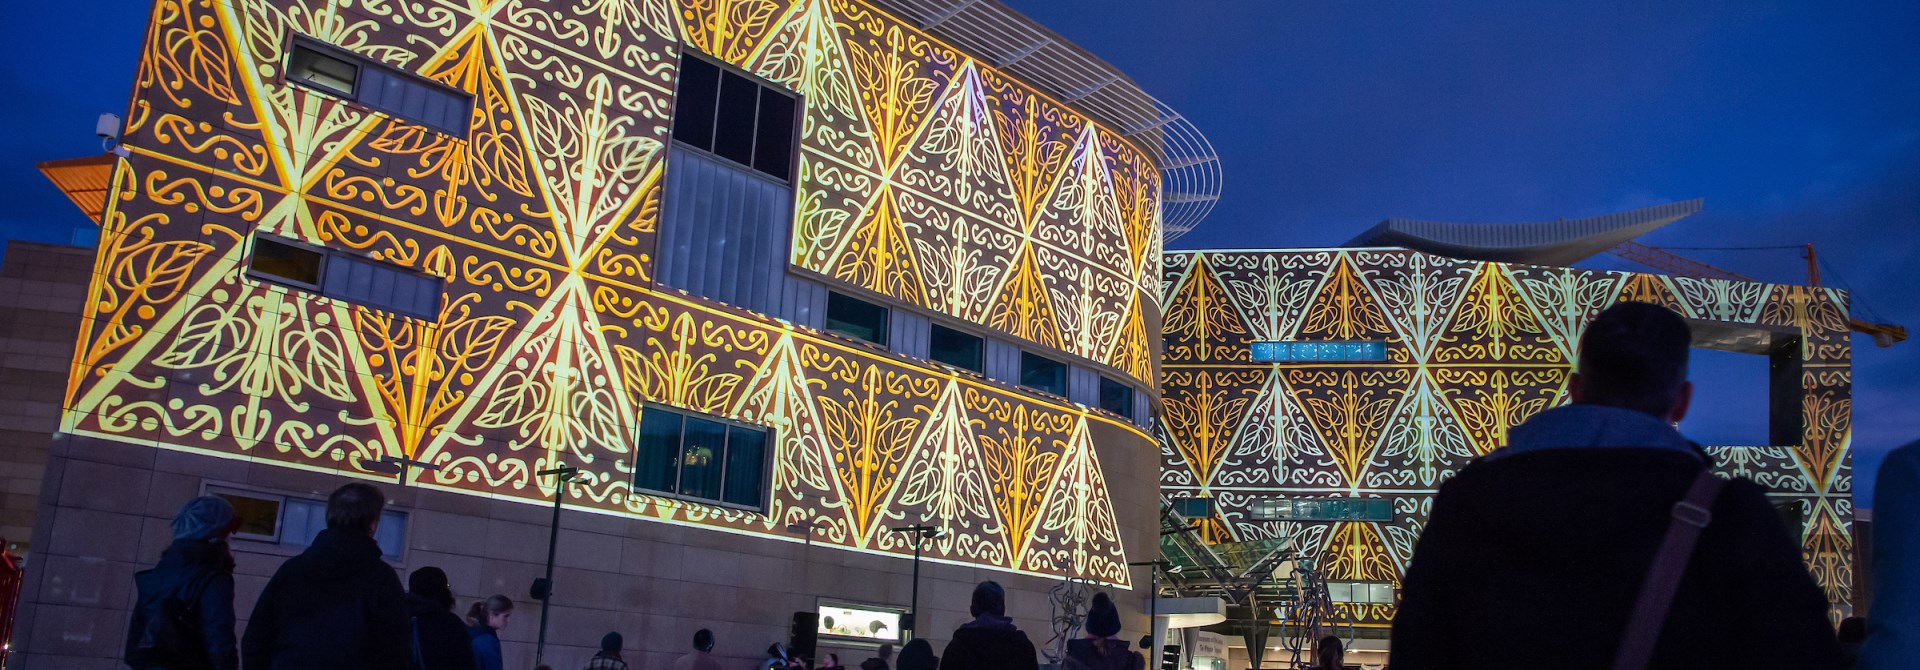 Photograph of orange and yellow Māori patterns projected onto the side of Te Papa building at night with people standing in front looking at it.